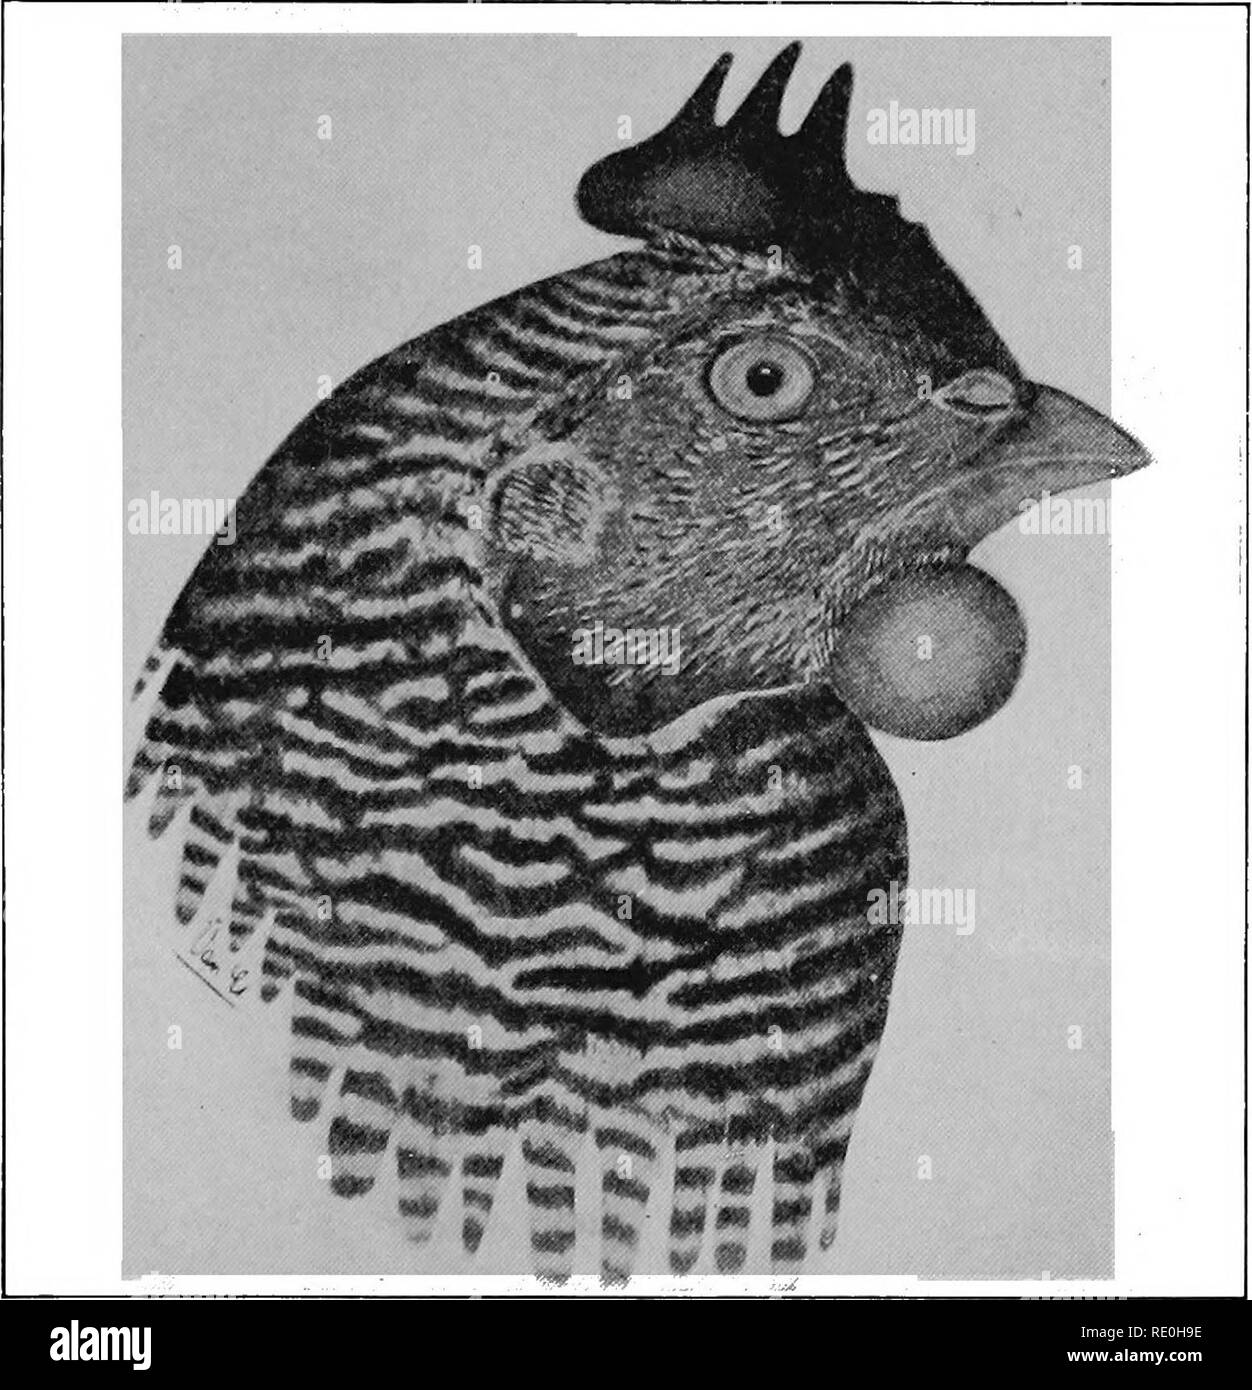 . Diseases of poultry; their etiology, diagnosis, treatment, and prevention. Poultry. Tuberculosu- 127 recorded 24, 48 and 72 hours after the injection. A positive reaction is indicated in a typical case liy a large swelHng. Fig. 18. â Head of chicken showing positive tuberculin reaction of comb , and right wattle. (After Van Es and Schalk.) about the point of injection. In the wattle this organ often becomes two to three times its original thickness. Agglutination and complement fixation tests have also been used to diagnose this disease.^ The tests so far re- ' Himmelberger, L. G., loc. cit. Stock Photo